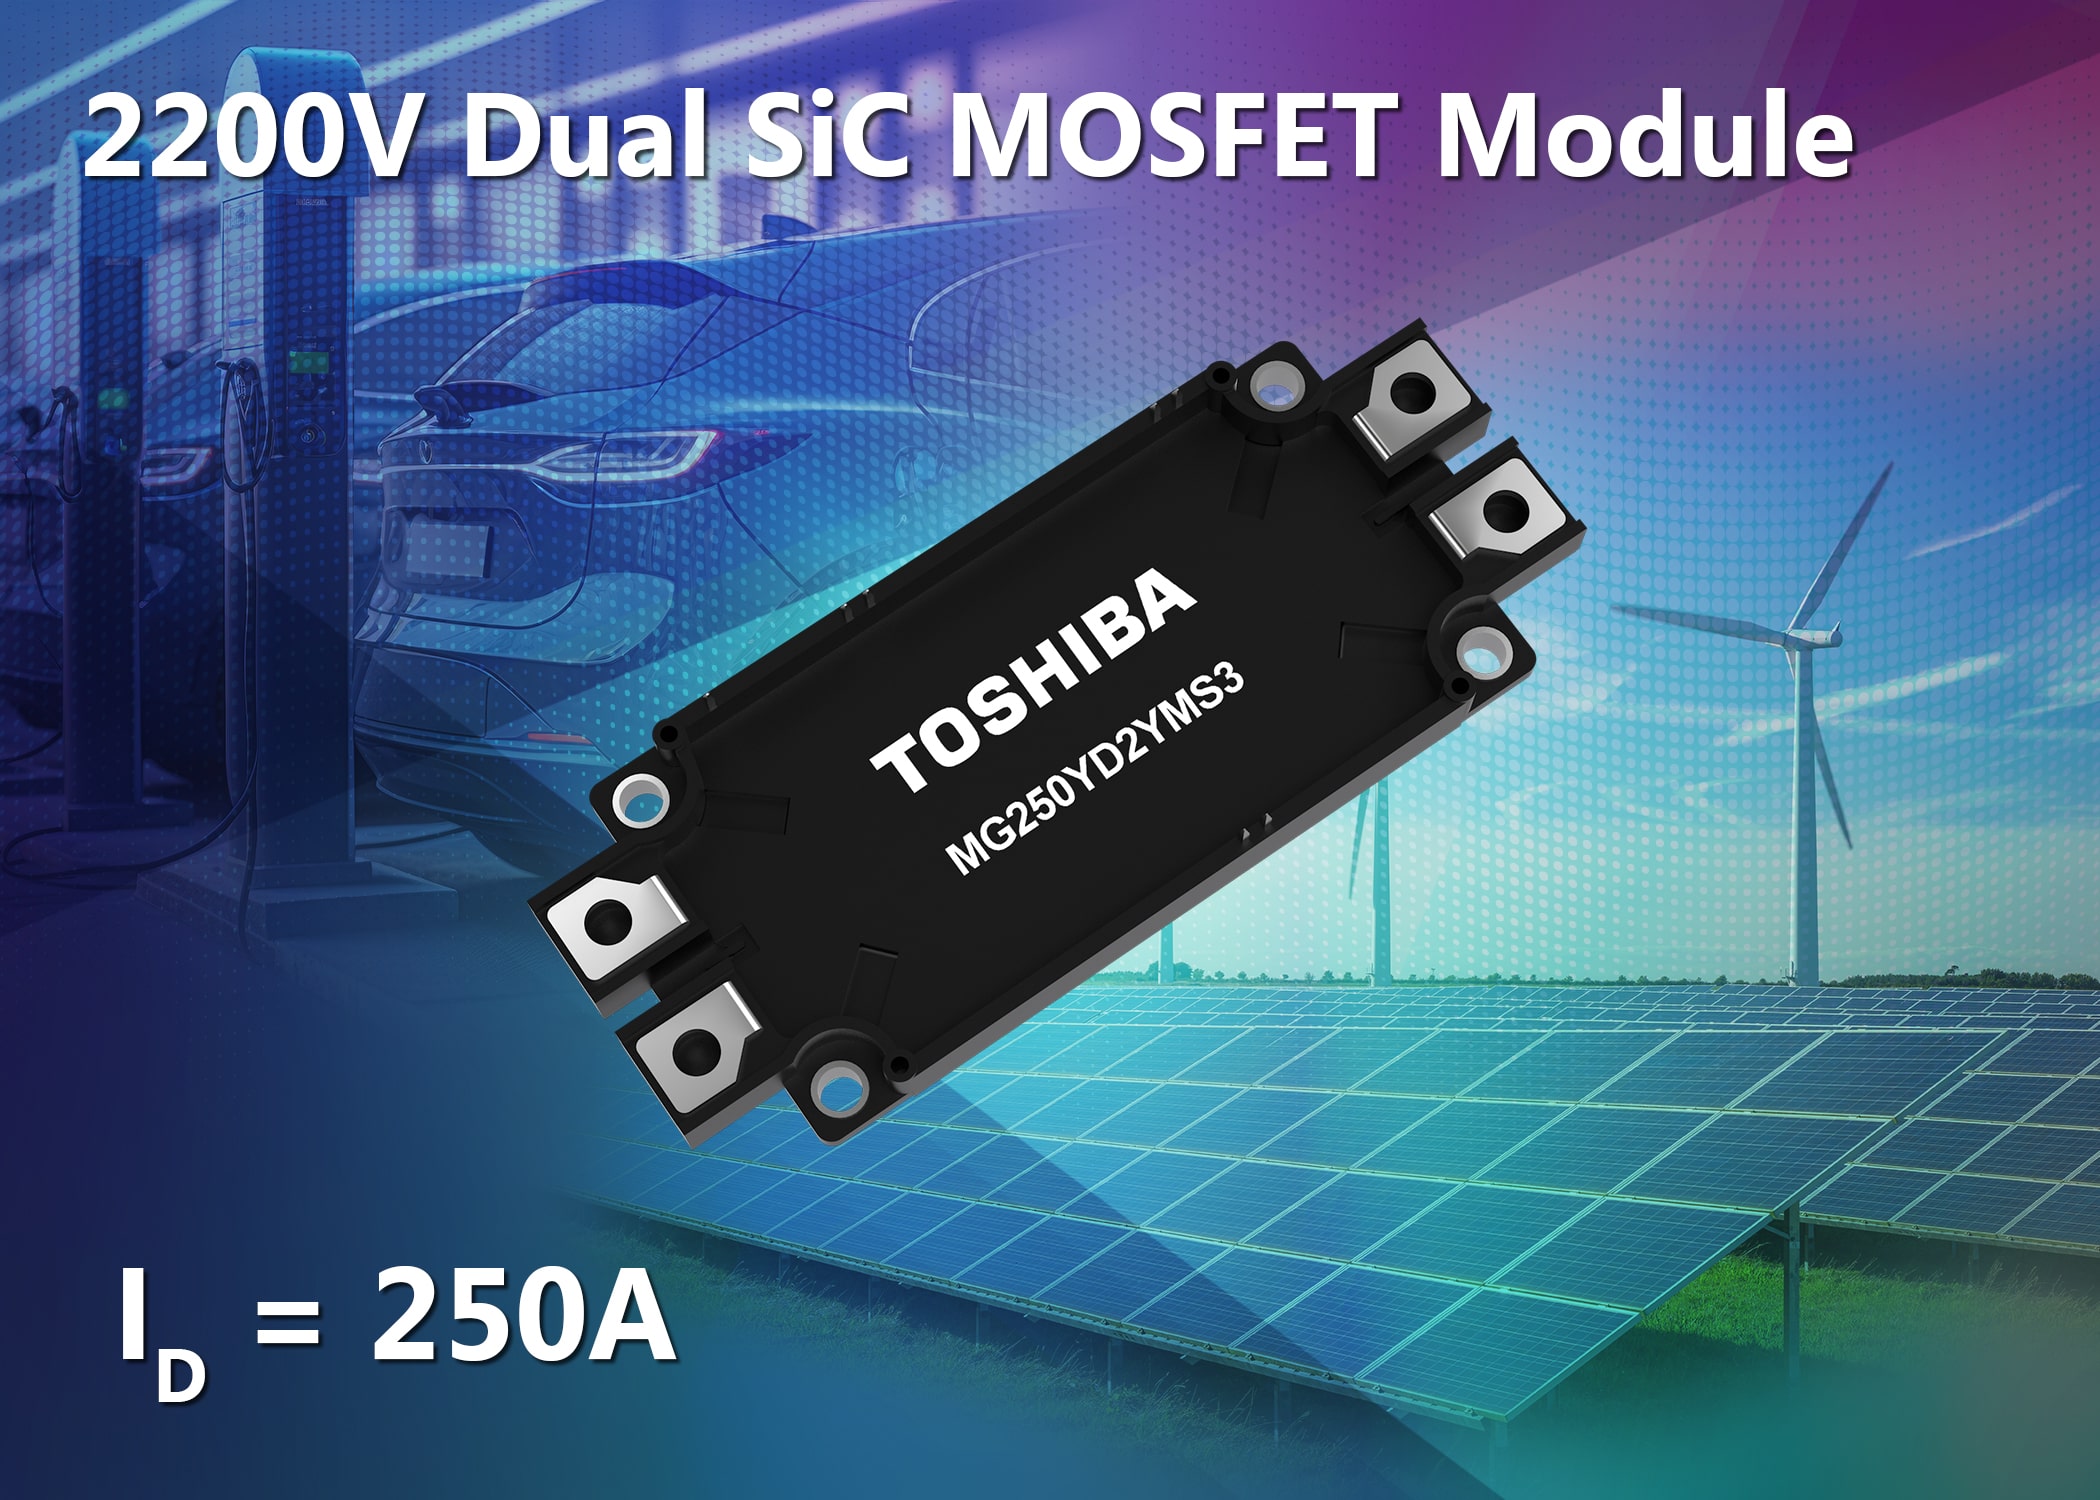 New 2200V silicon carbide MOSFETs enhance efficiency in challenging applications